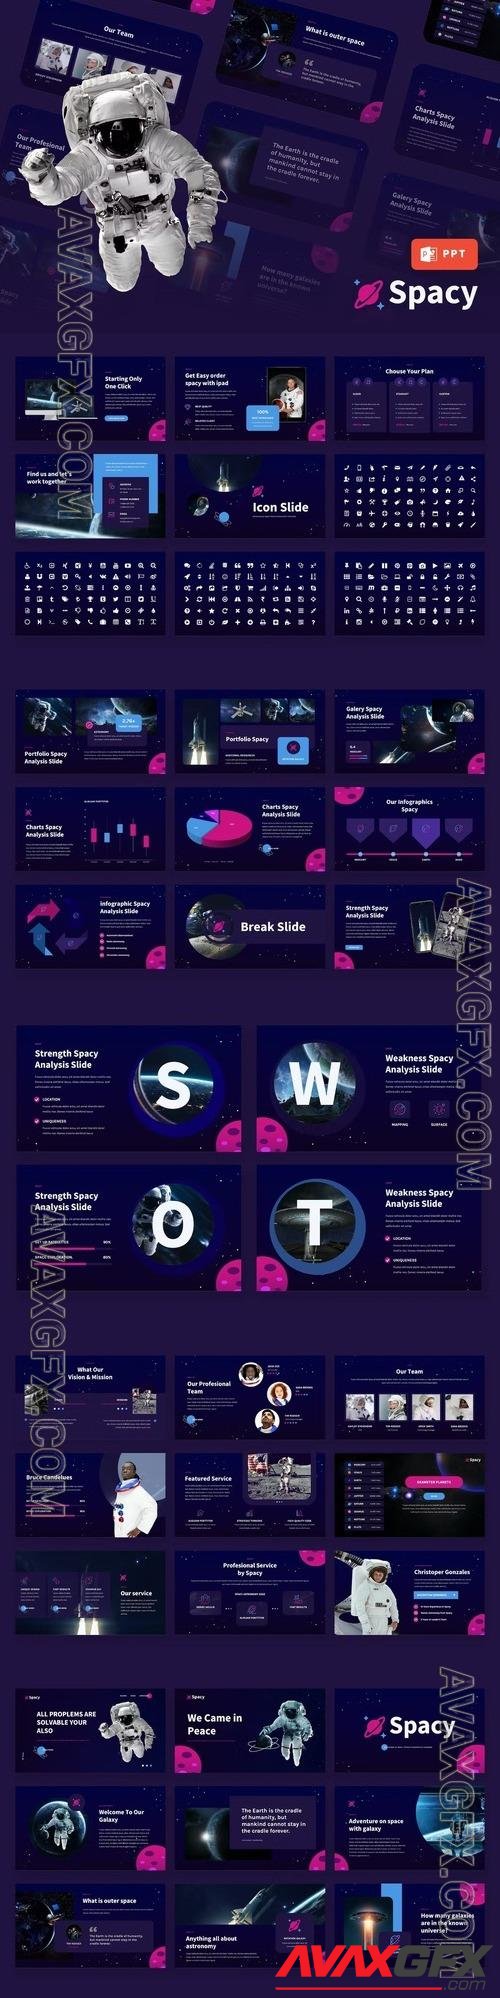 Spacy - Space Theme Powerpoint Template